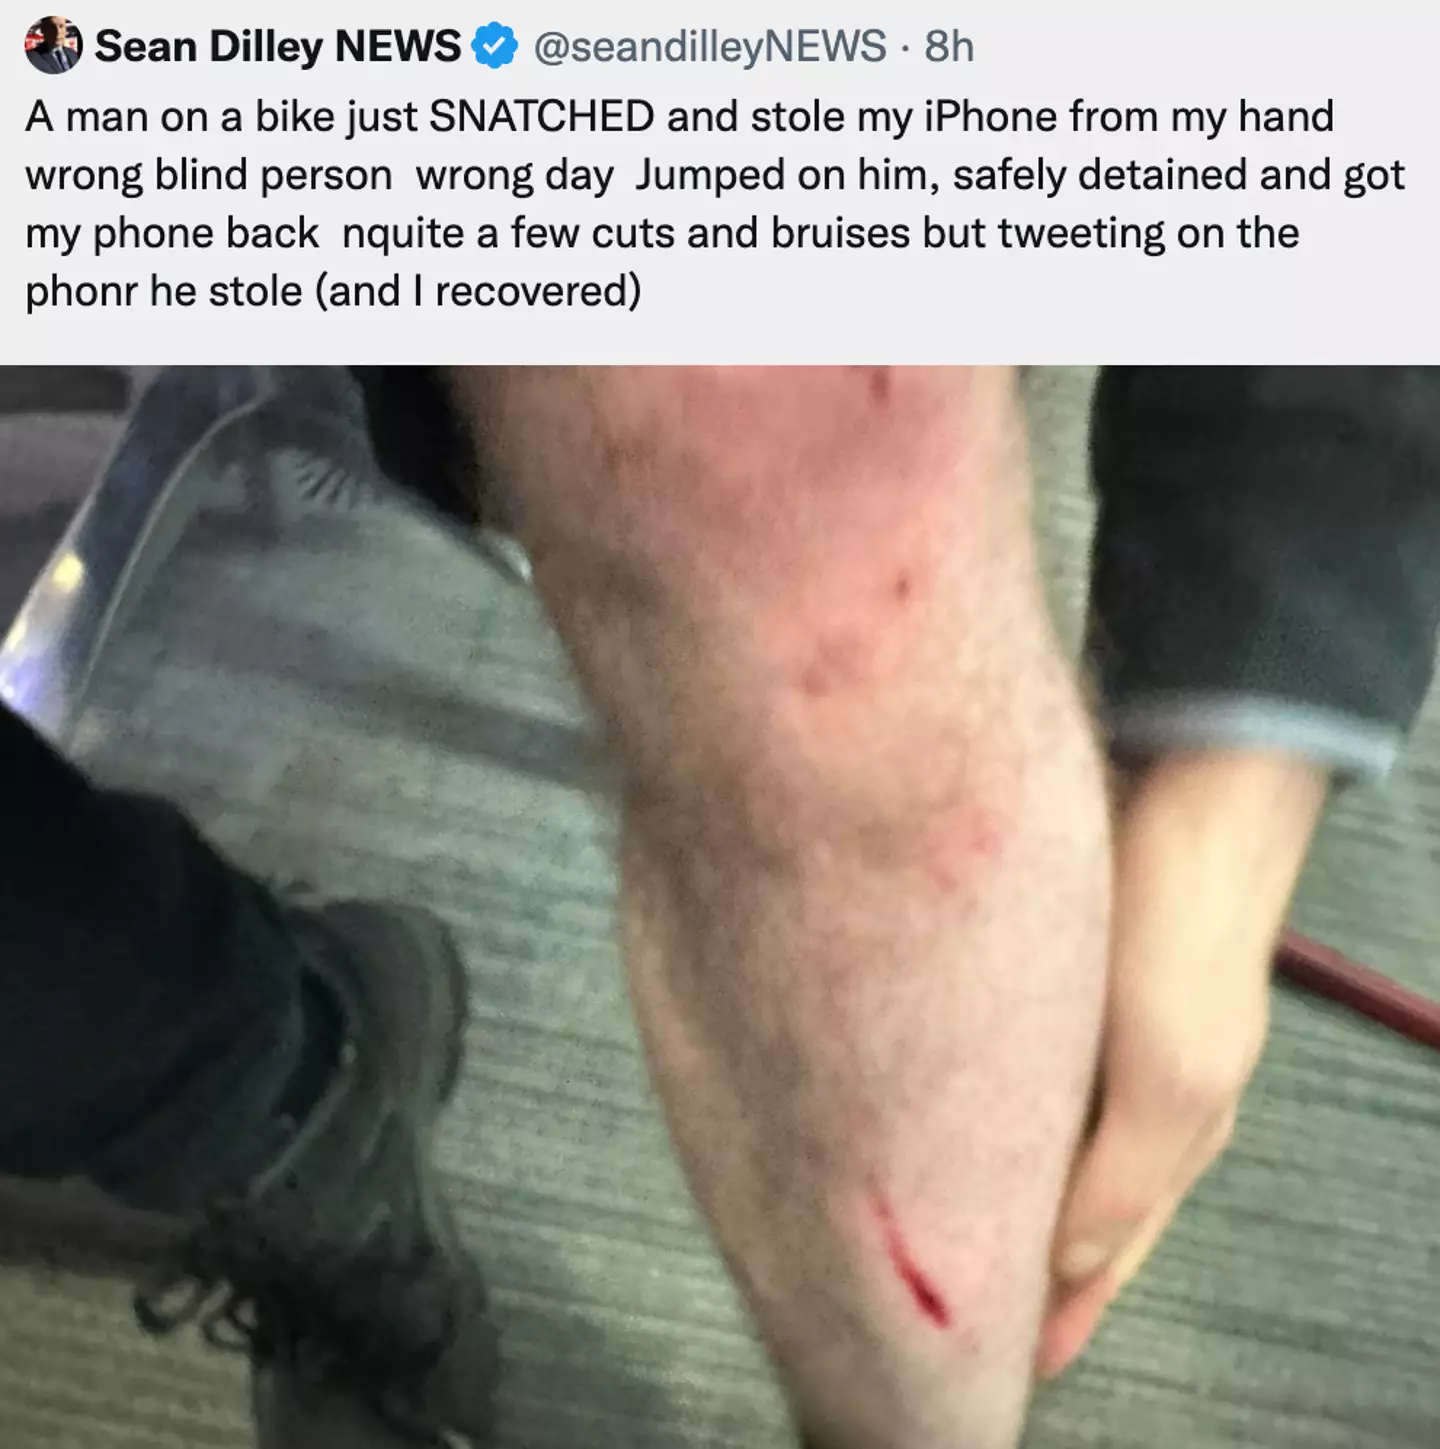 Sean's phone was stolen straight out of his hand.